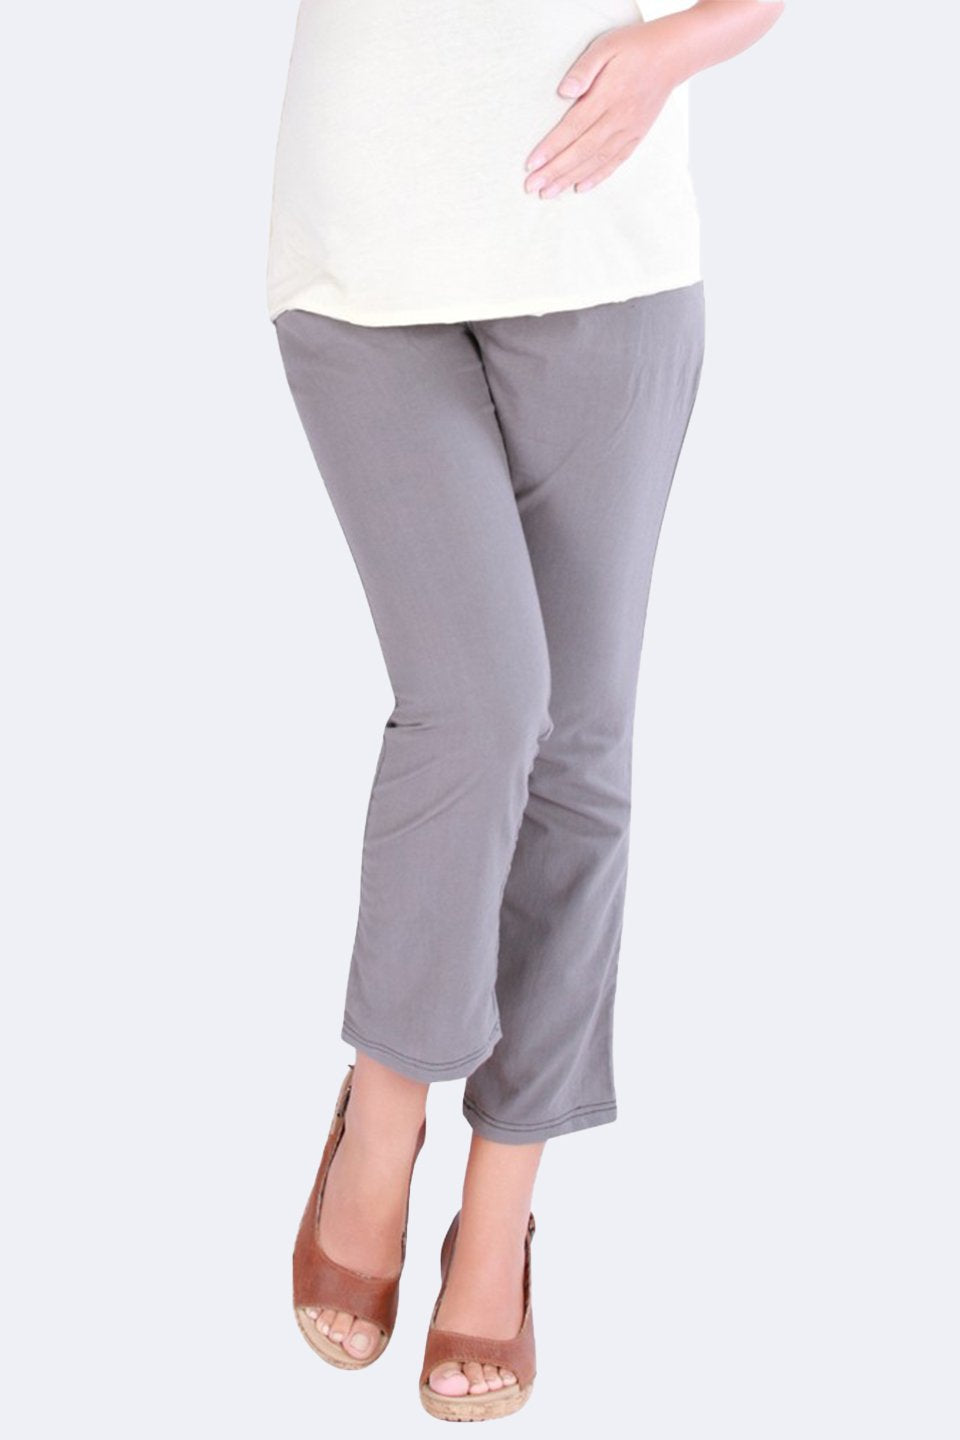 Women's Maternity Jeans | Just Jeans